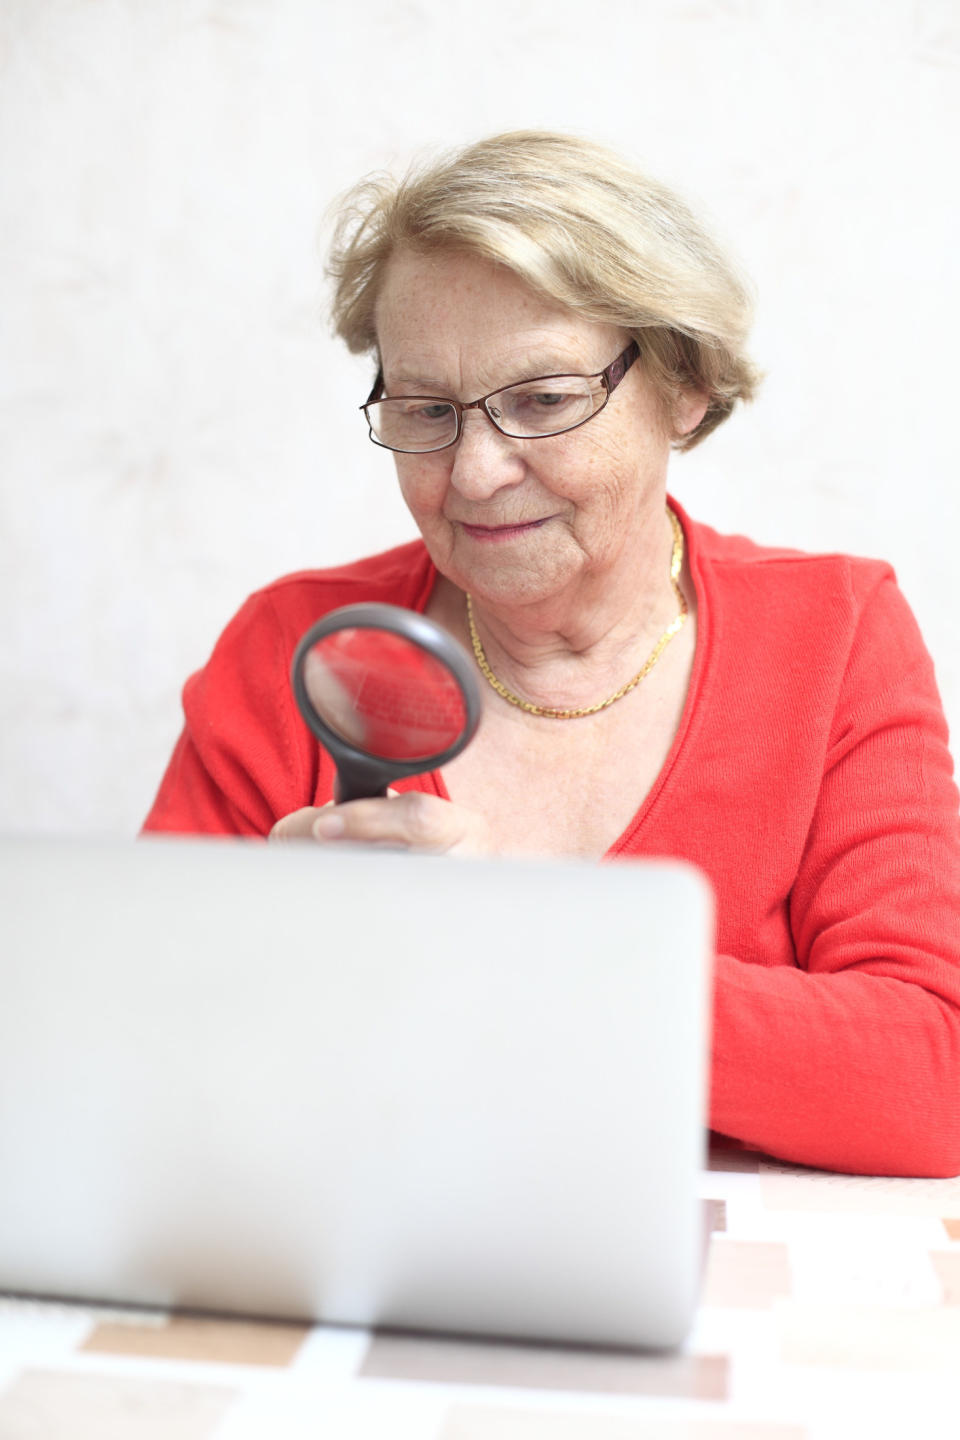 An old woman looks at a computer through a magnifying glass